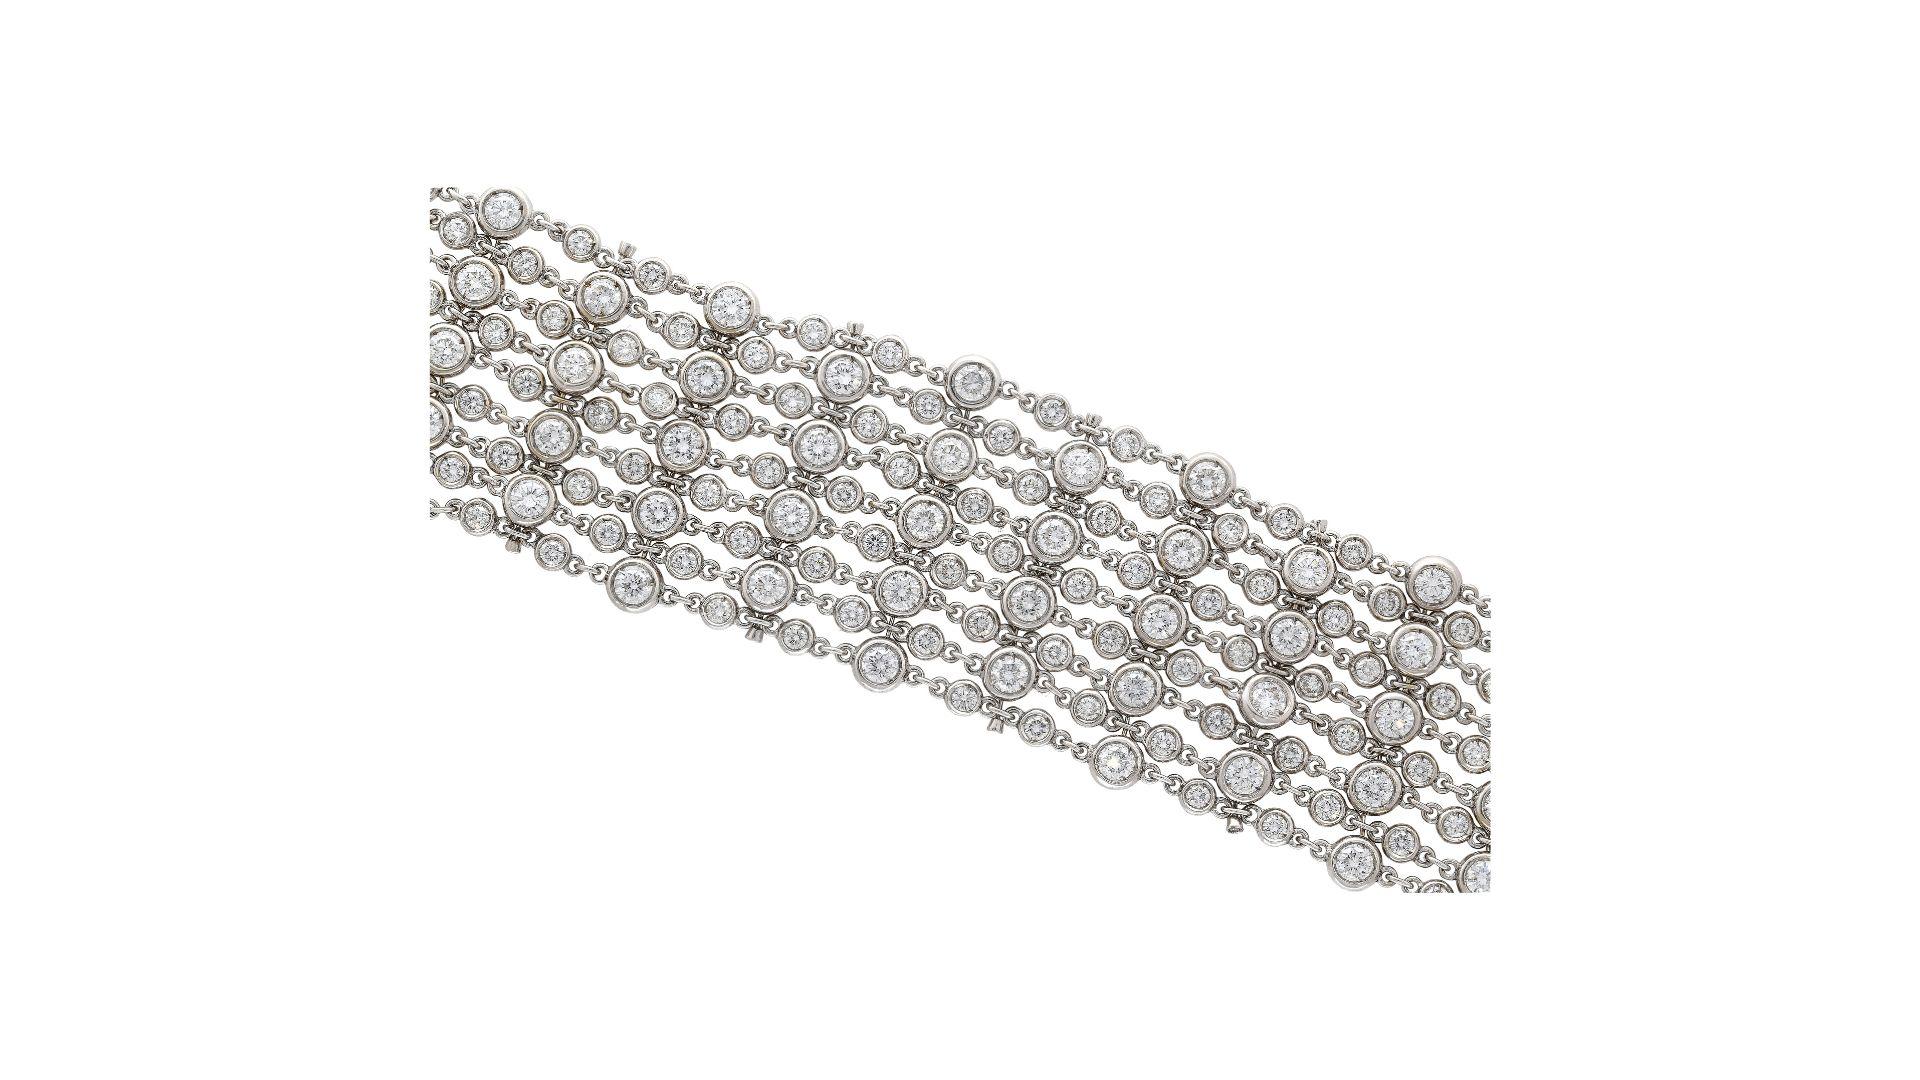 25.70 CTTW Round Cut Diamond Thick Bracelet in 18K White Gold, a luxurious piece weighing 68.40 grams and measuring 6.5 x 1.2 inches. The bracelet features 198 round-cut diamonds, each handset in a bezel setting with F-G color and VS-SI clarity. The